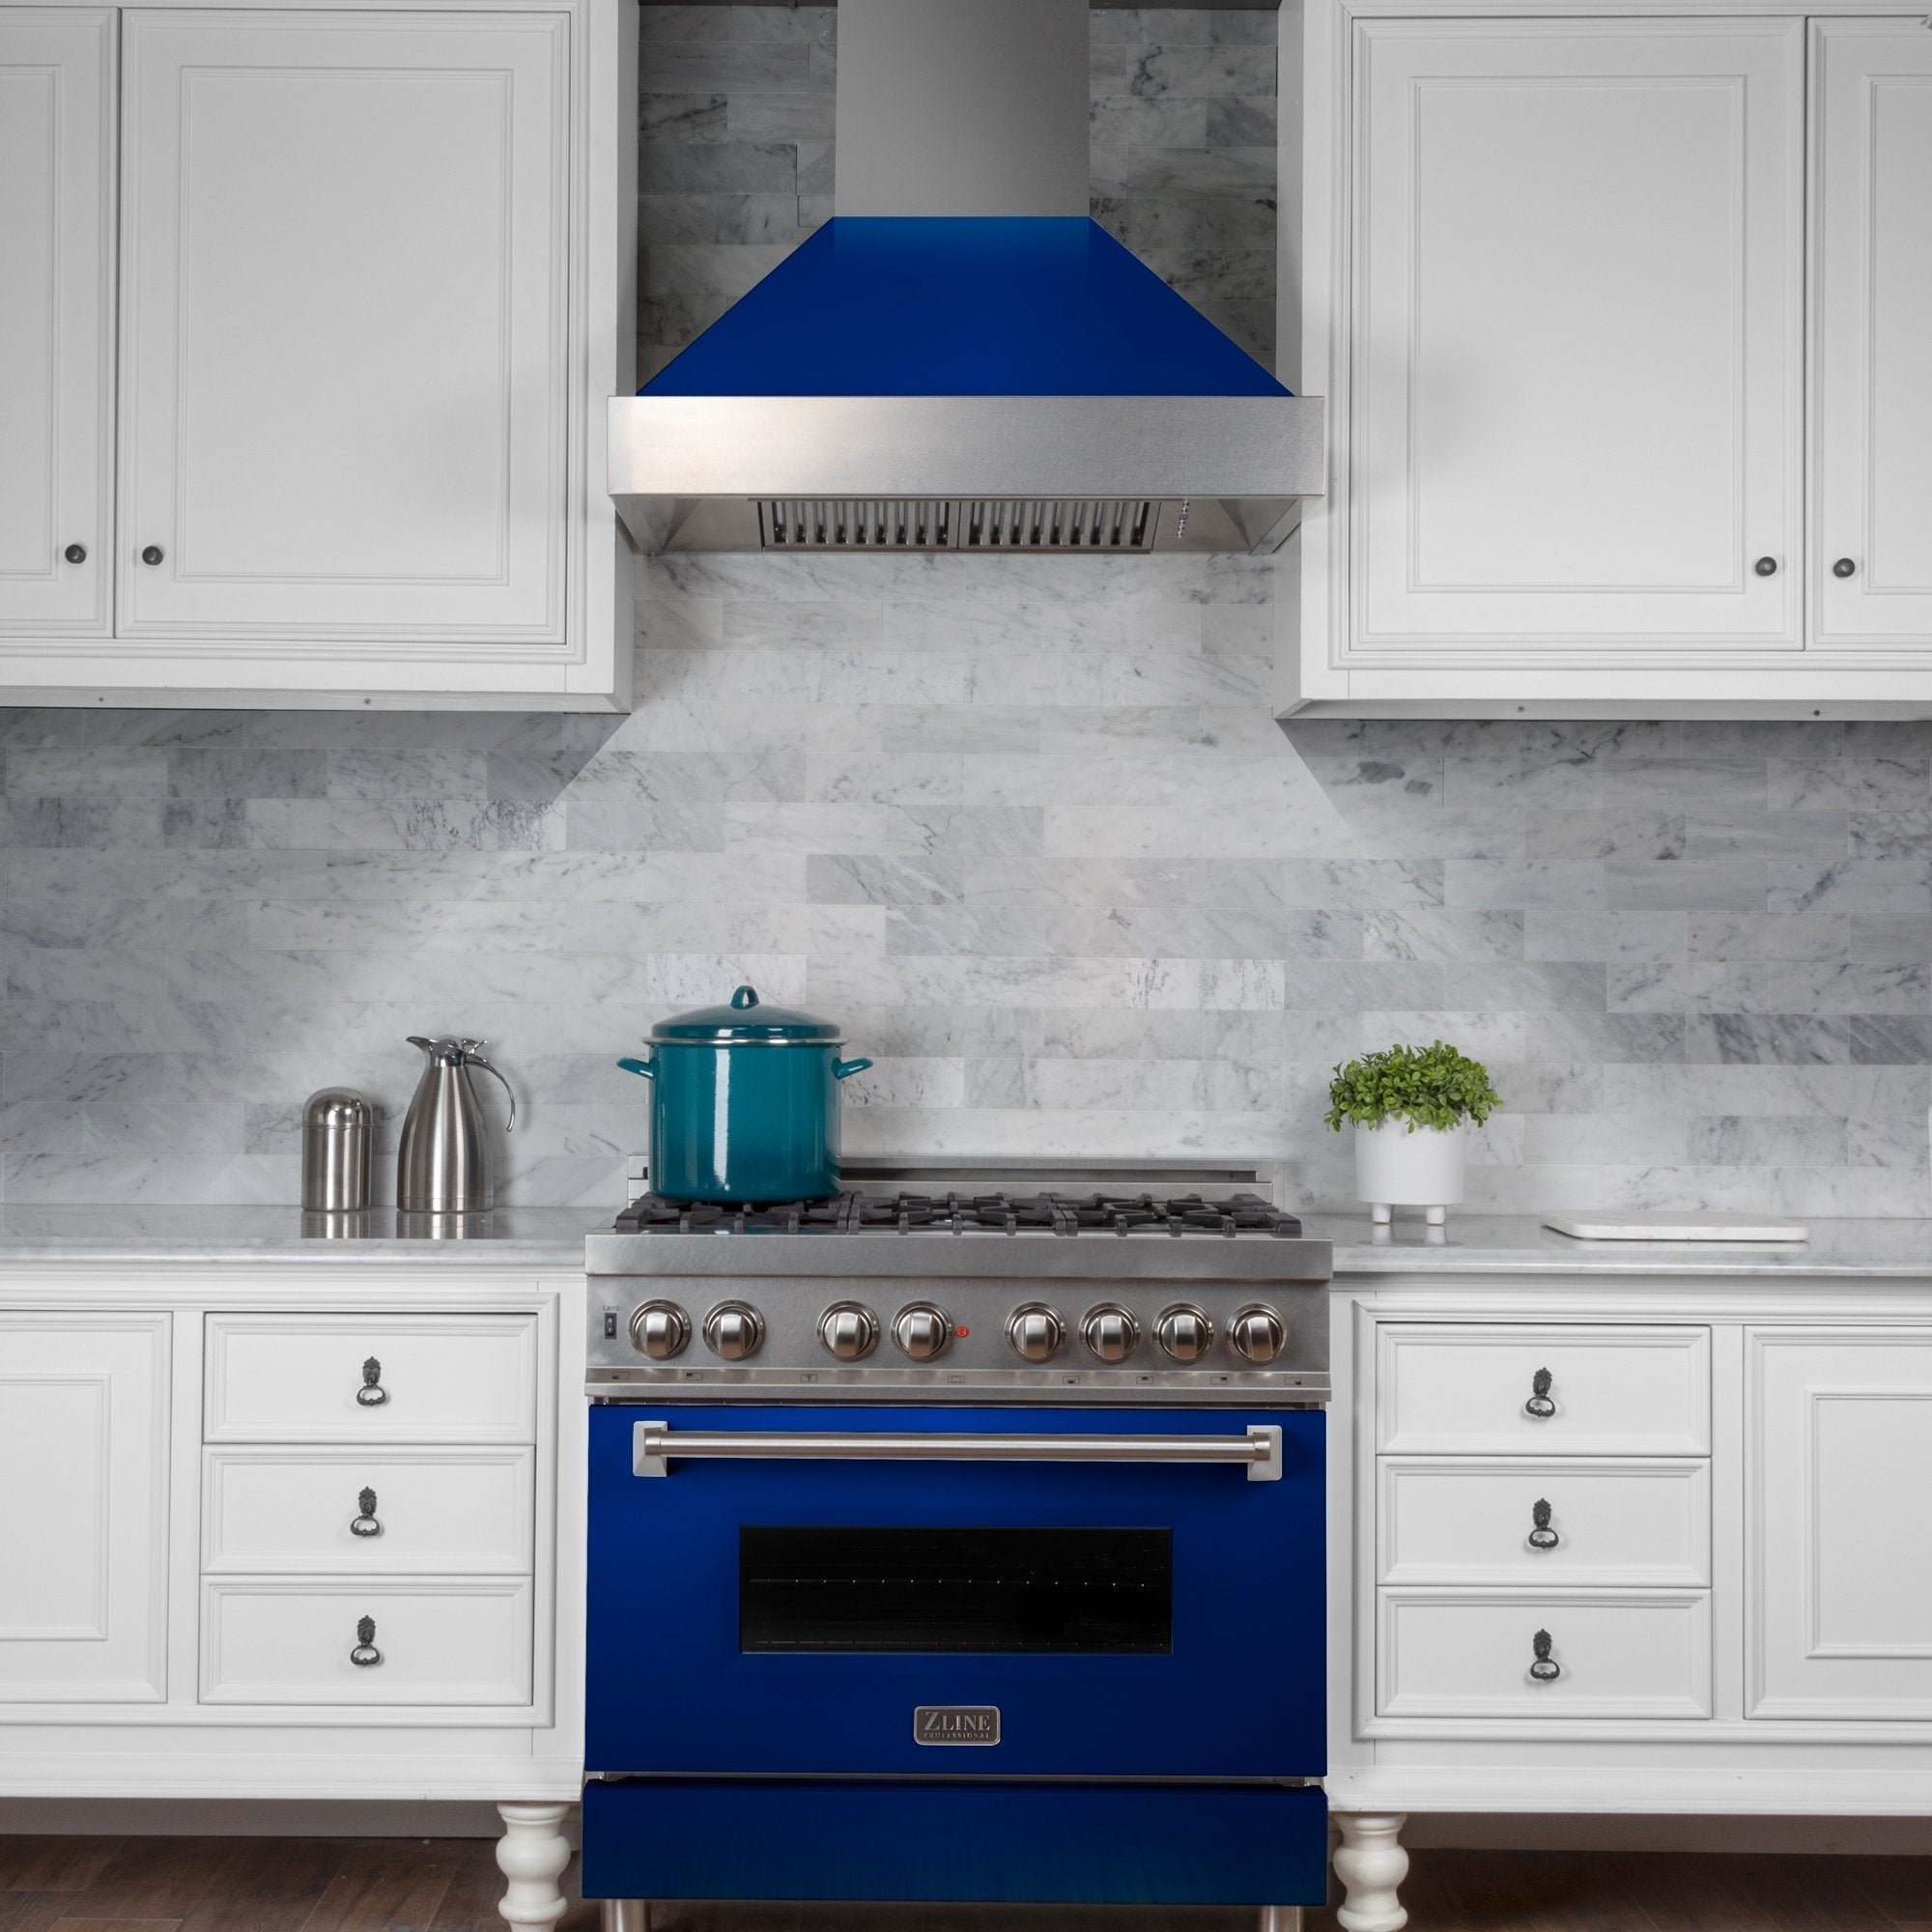 ZLINE Ducted Fingerprint Resistant Stainless Steel Range Hood with Blue Gloss Shell (8654BG) with short chimney in a kitchen with matching blue gloss range from front.